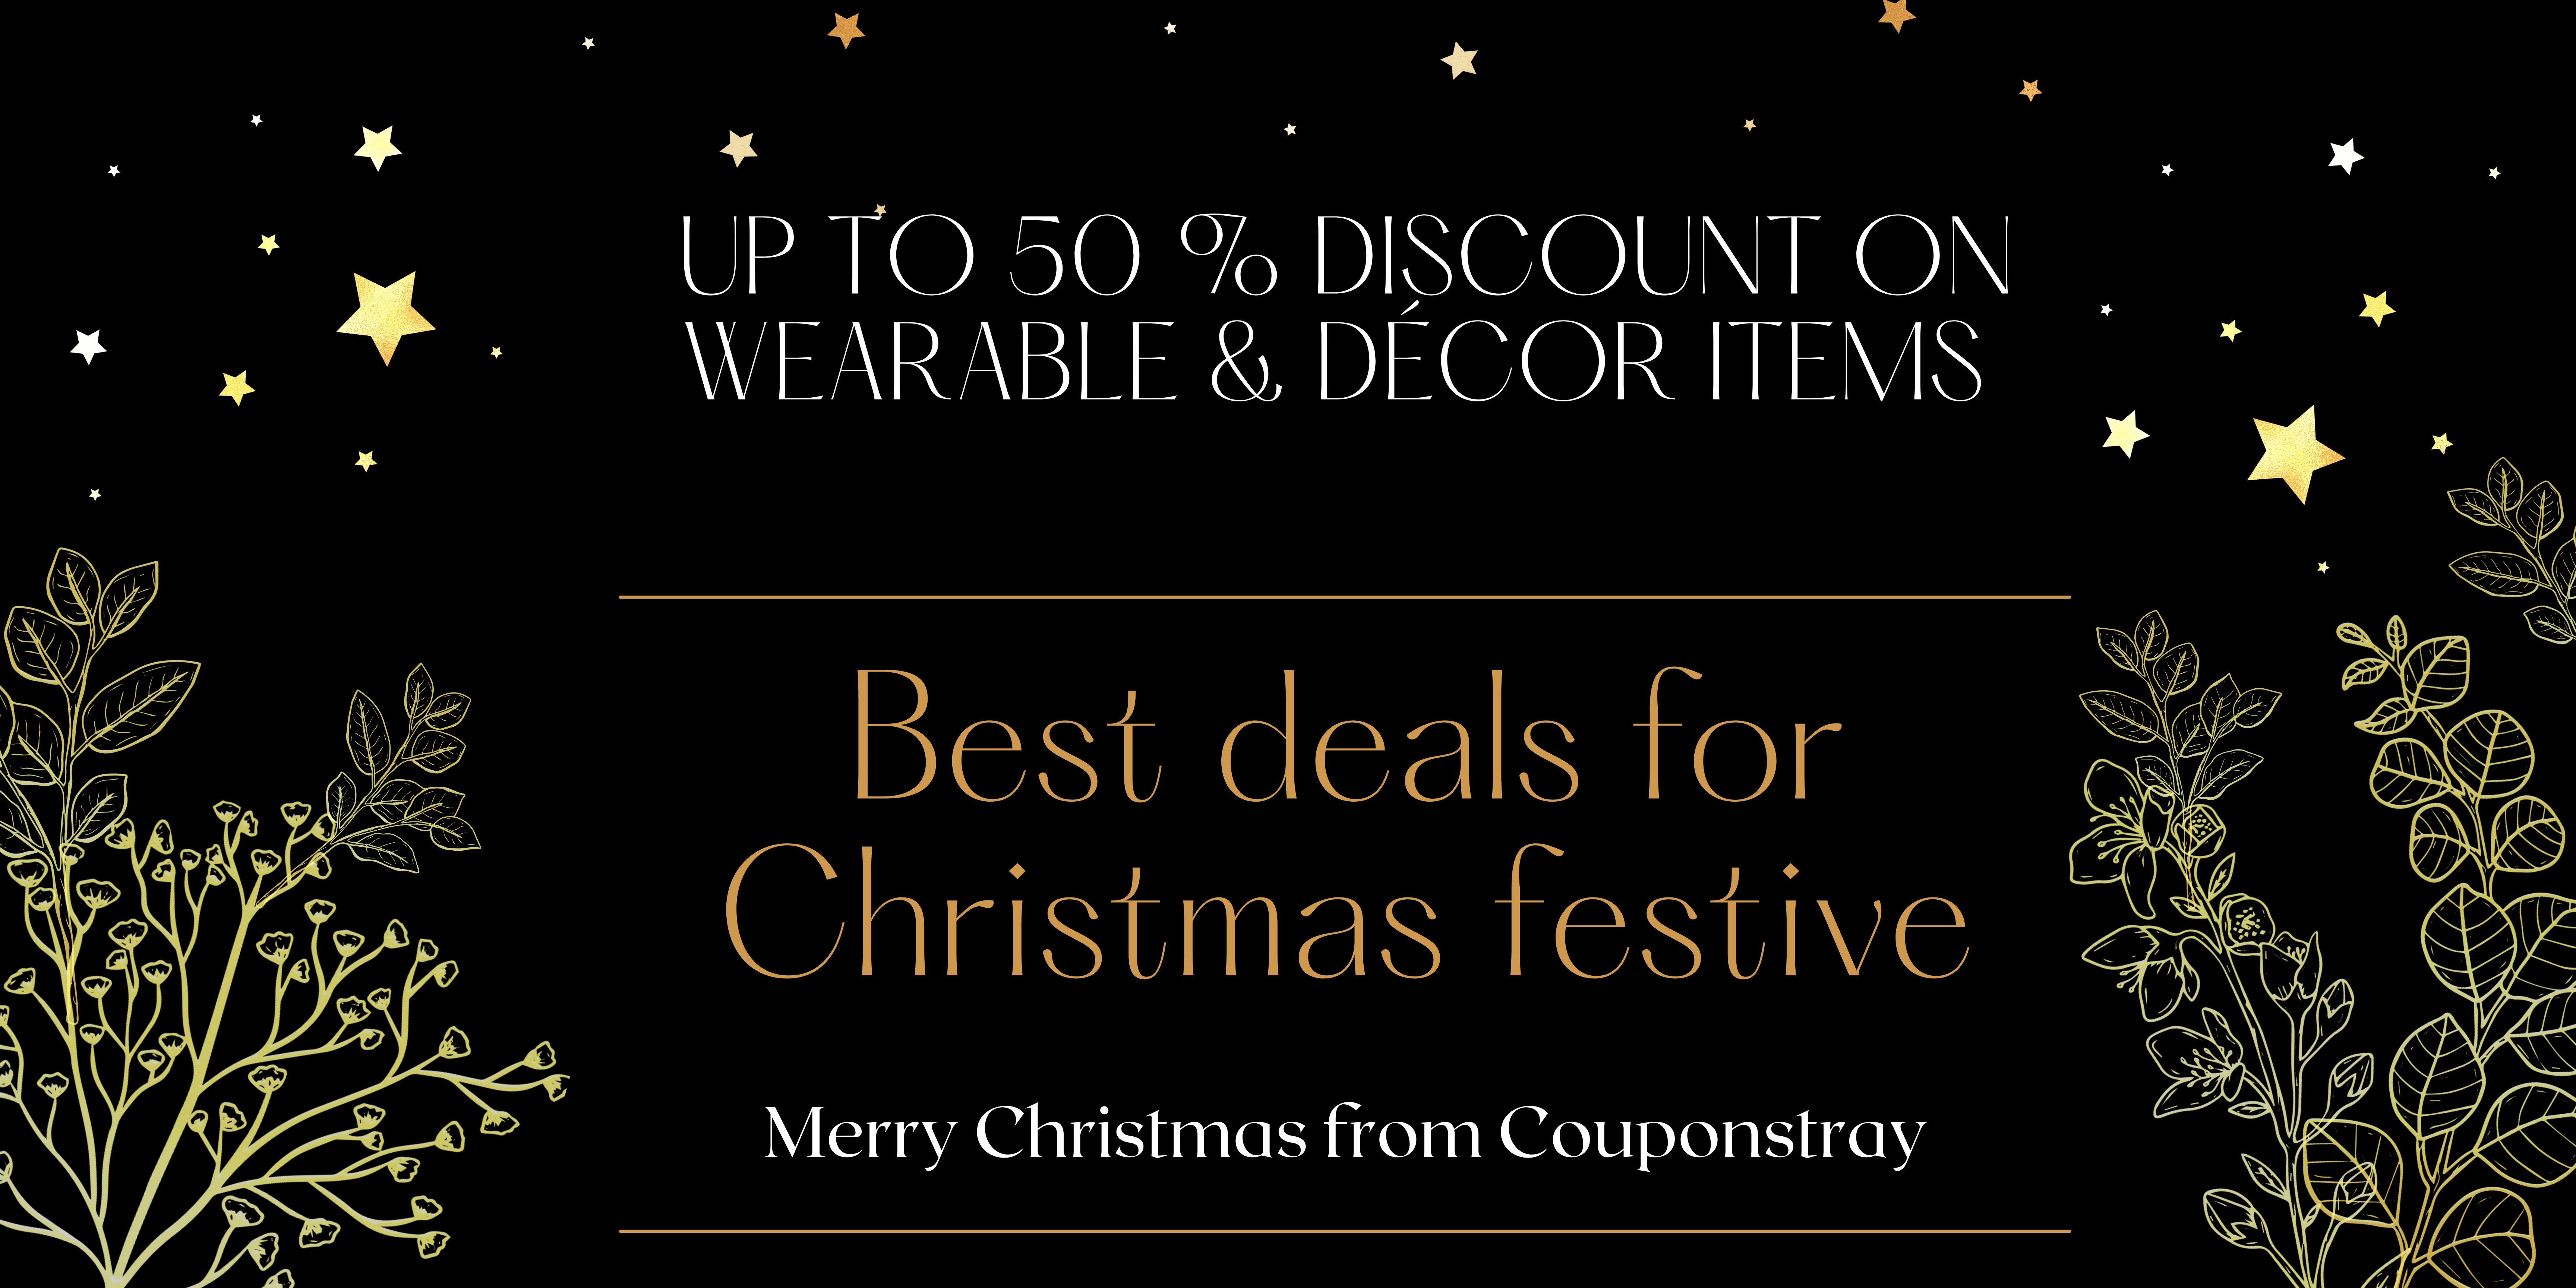 Best deals for Christmas festive:Up to 50 % discount on wearable & dÃ©cor items 